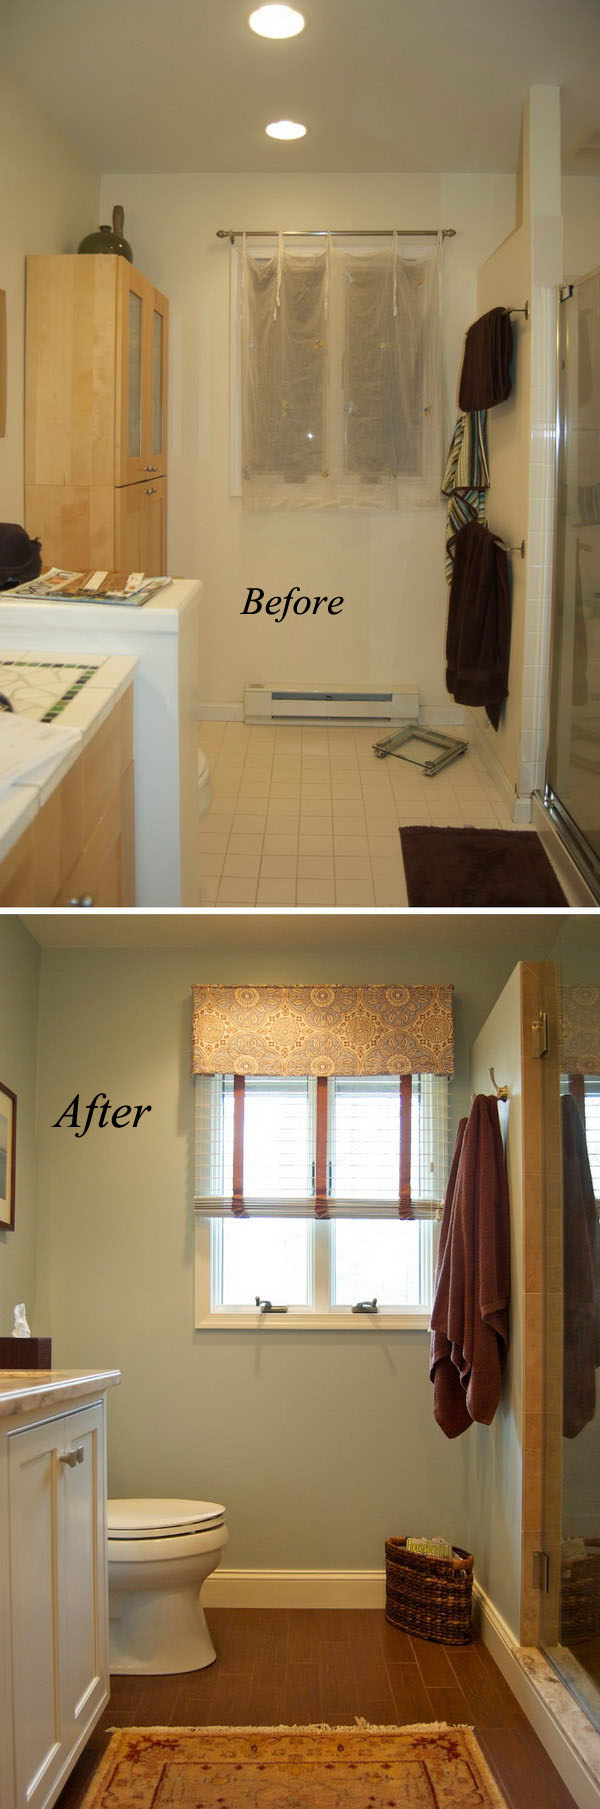 5-6-bathroom-remodel-before-and-after